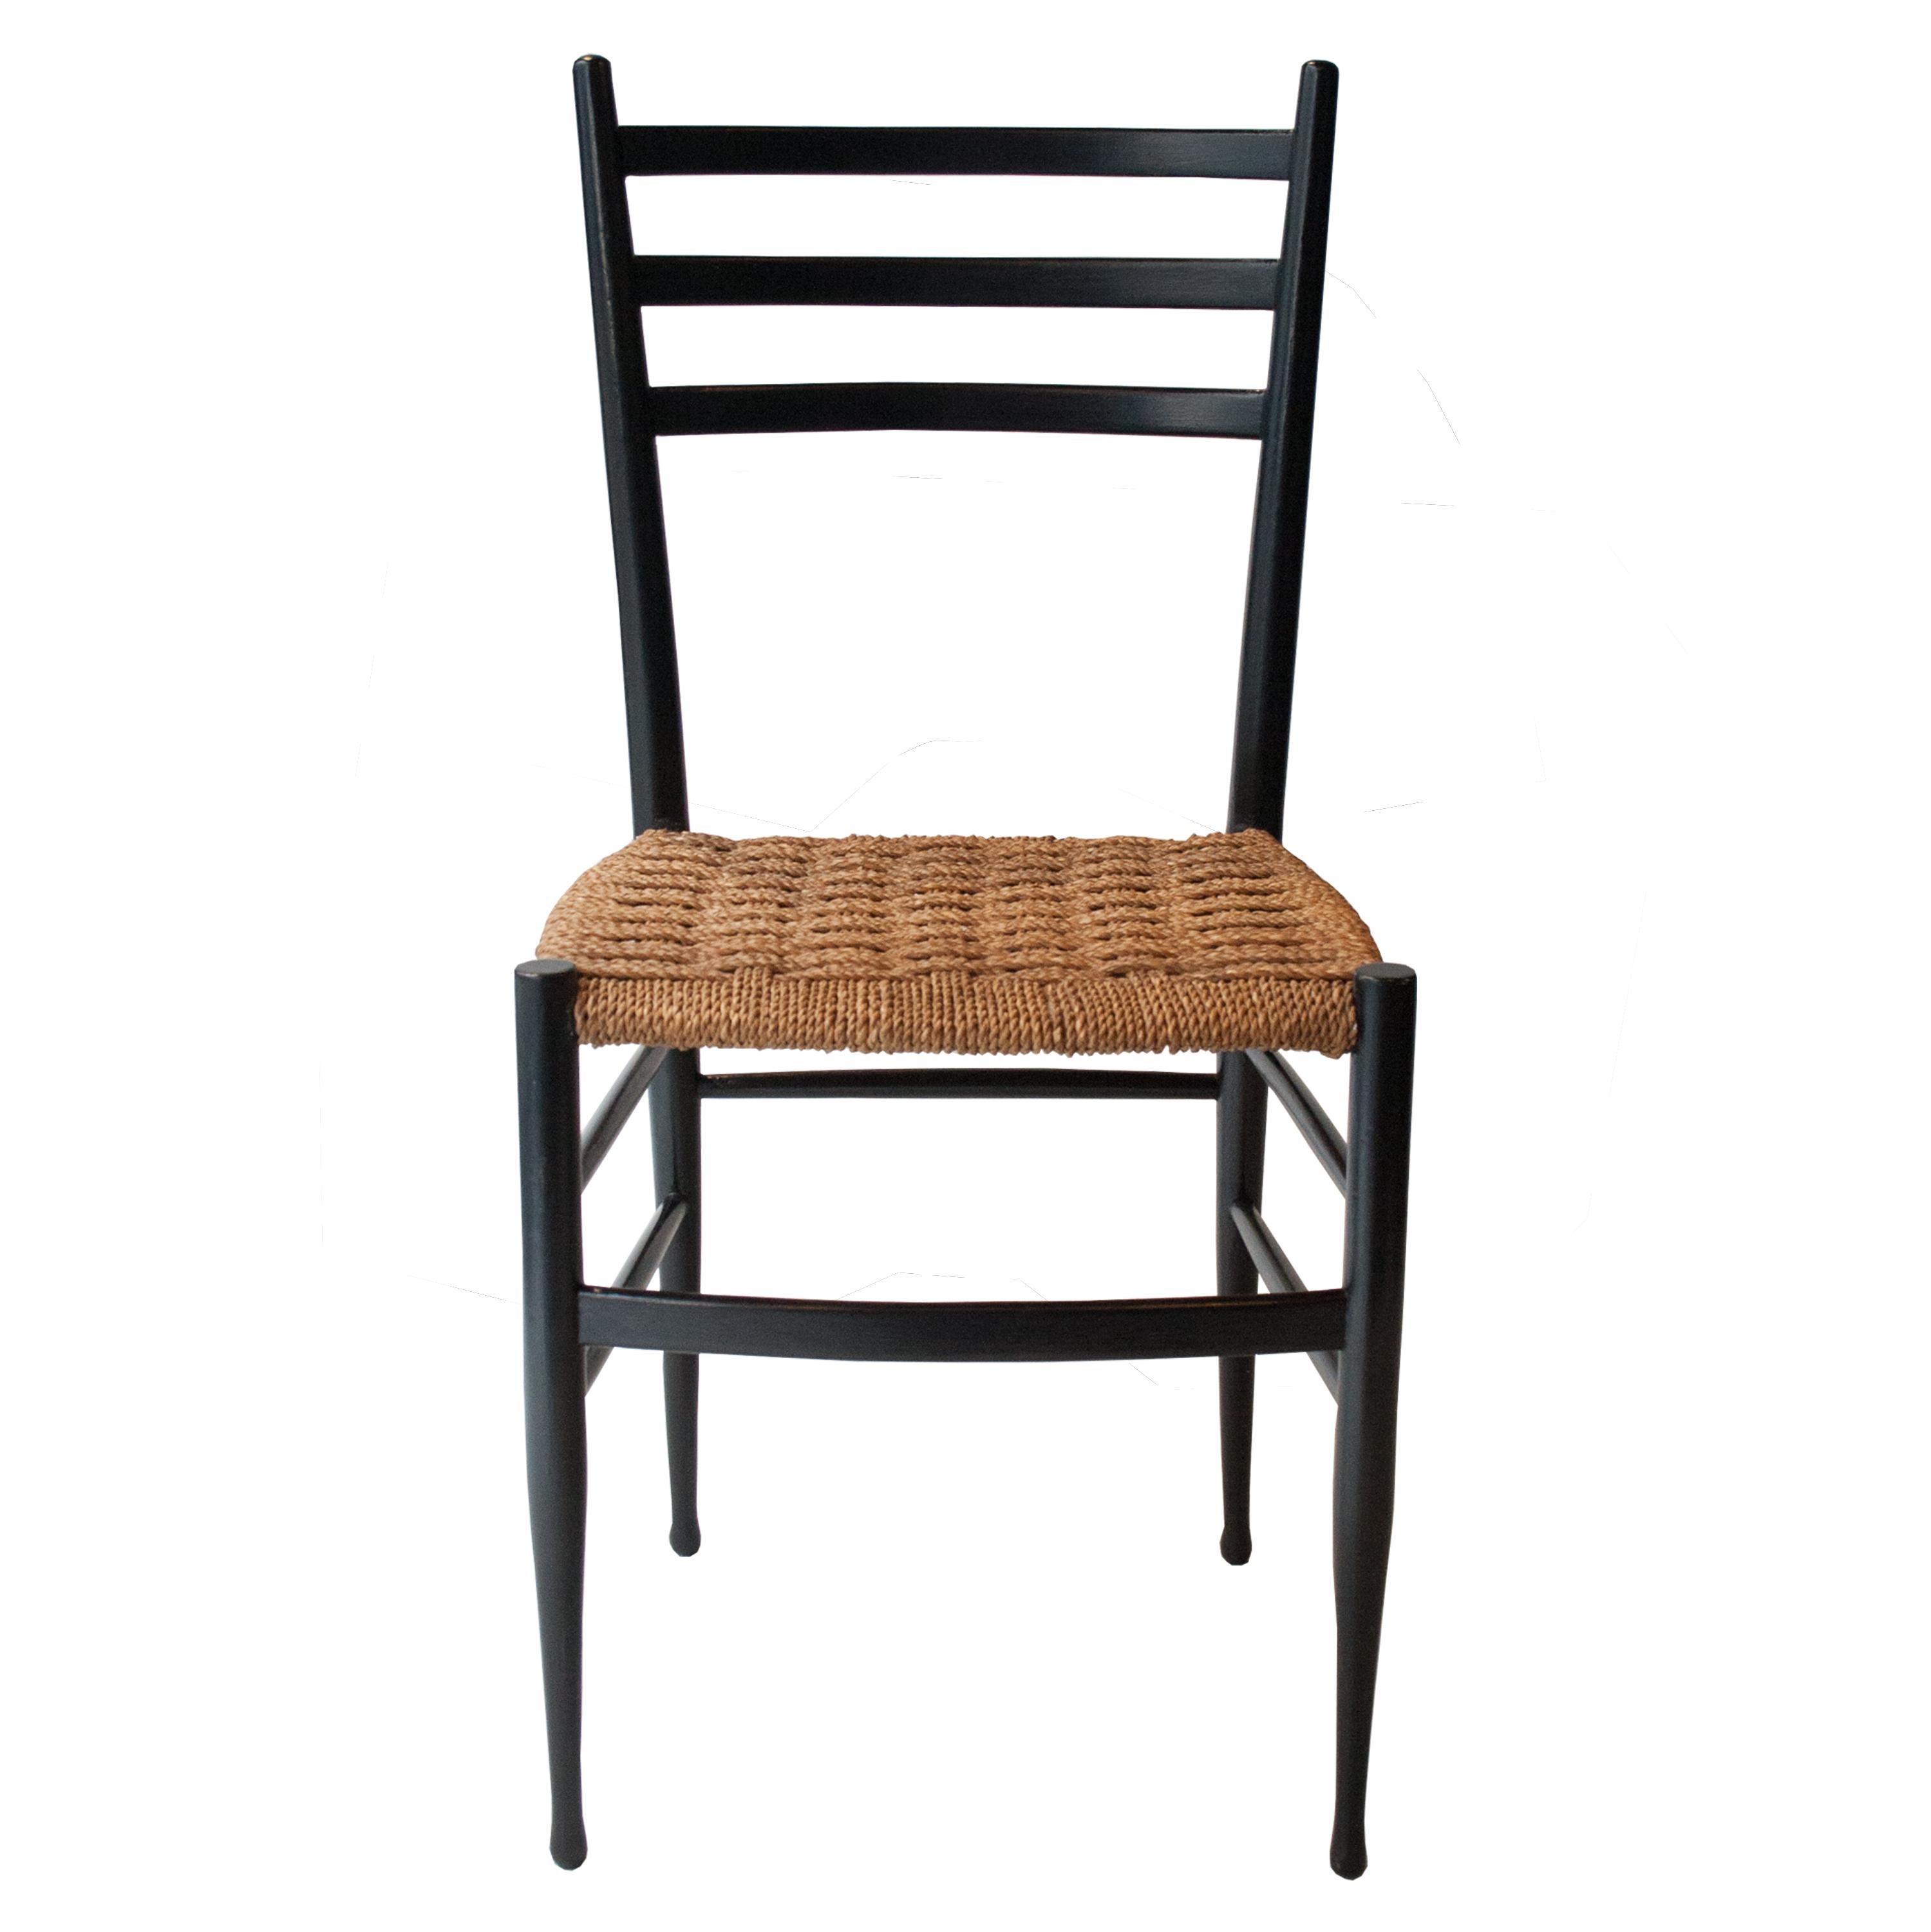 Set of 4 Italian chairs from the 1950s Gio Ponti style. Black lacquered solid wood structure with seats in natural fiber.